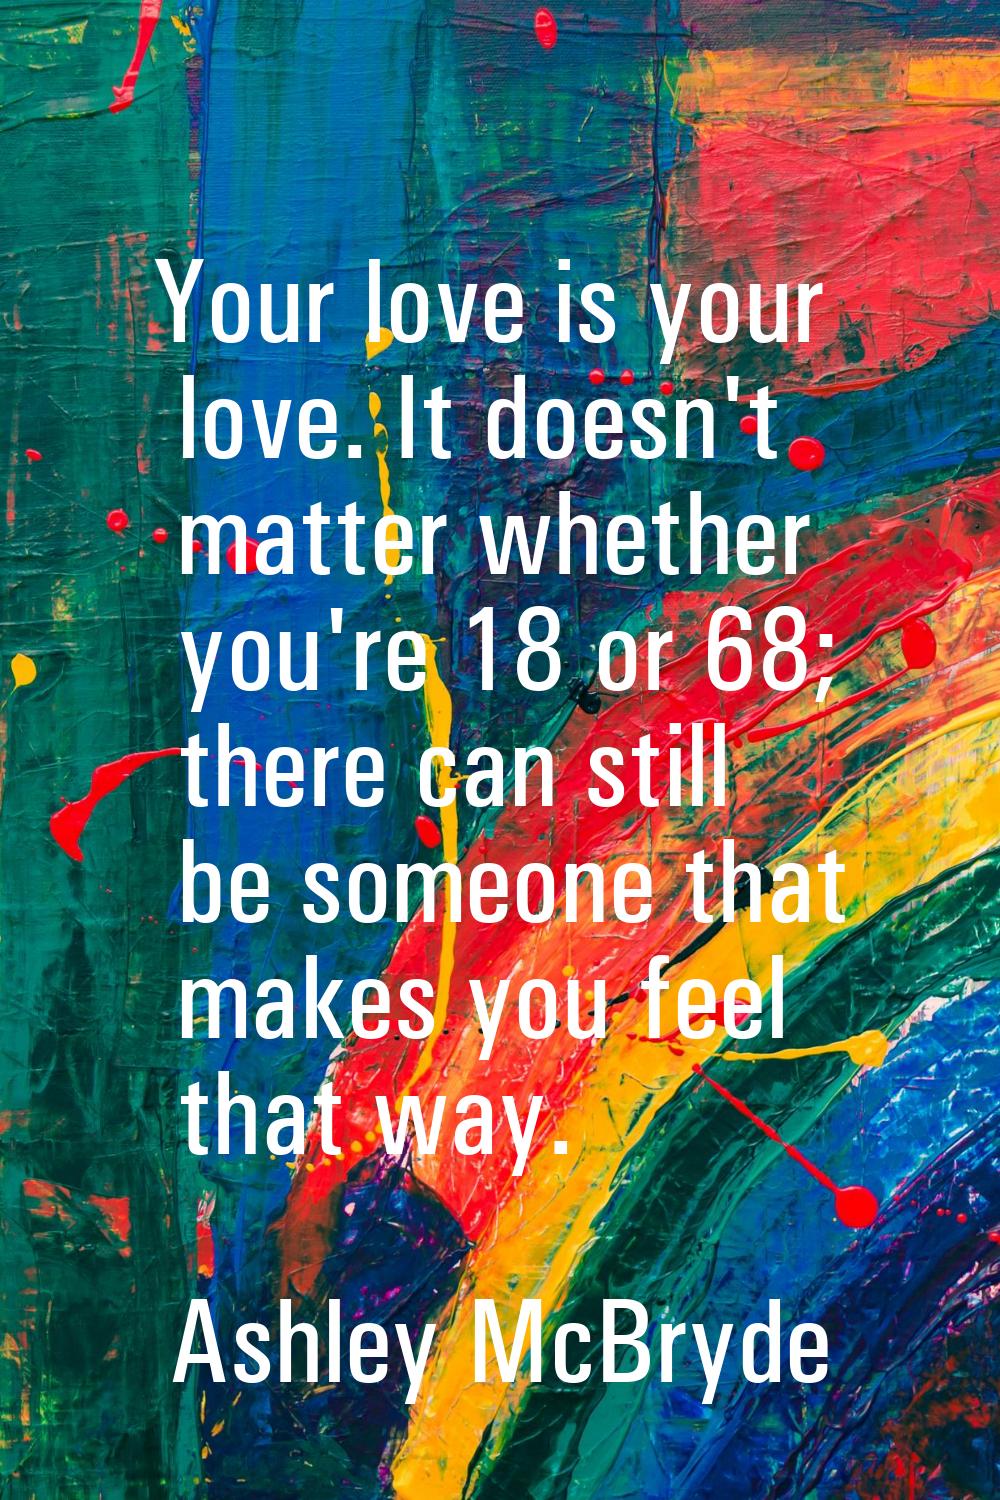 Your love is your love. It doesn't matter whether you're 18 or 68; there can still be someone that 